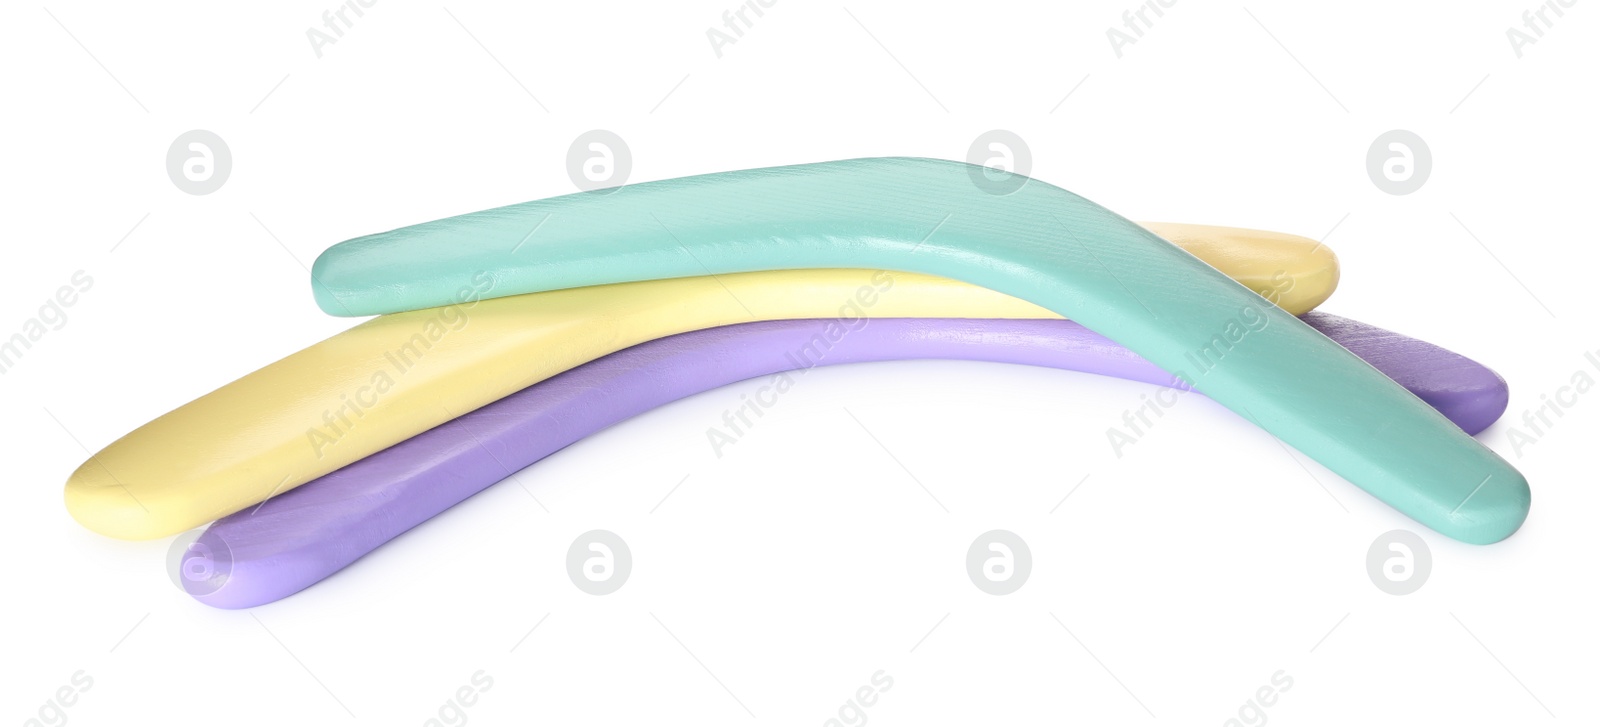 Photo of Set of color boomerangs on white background